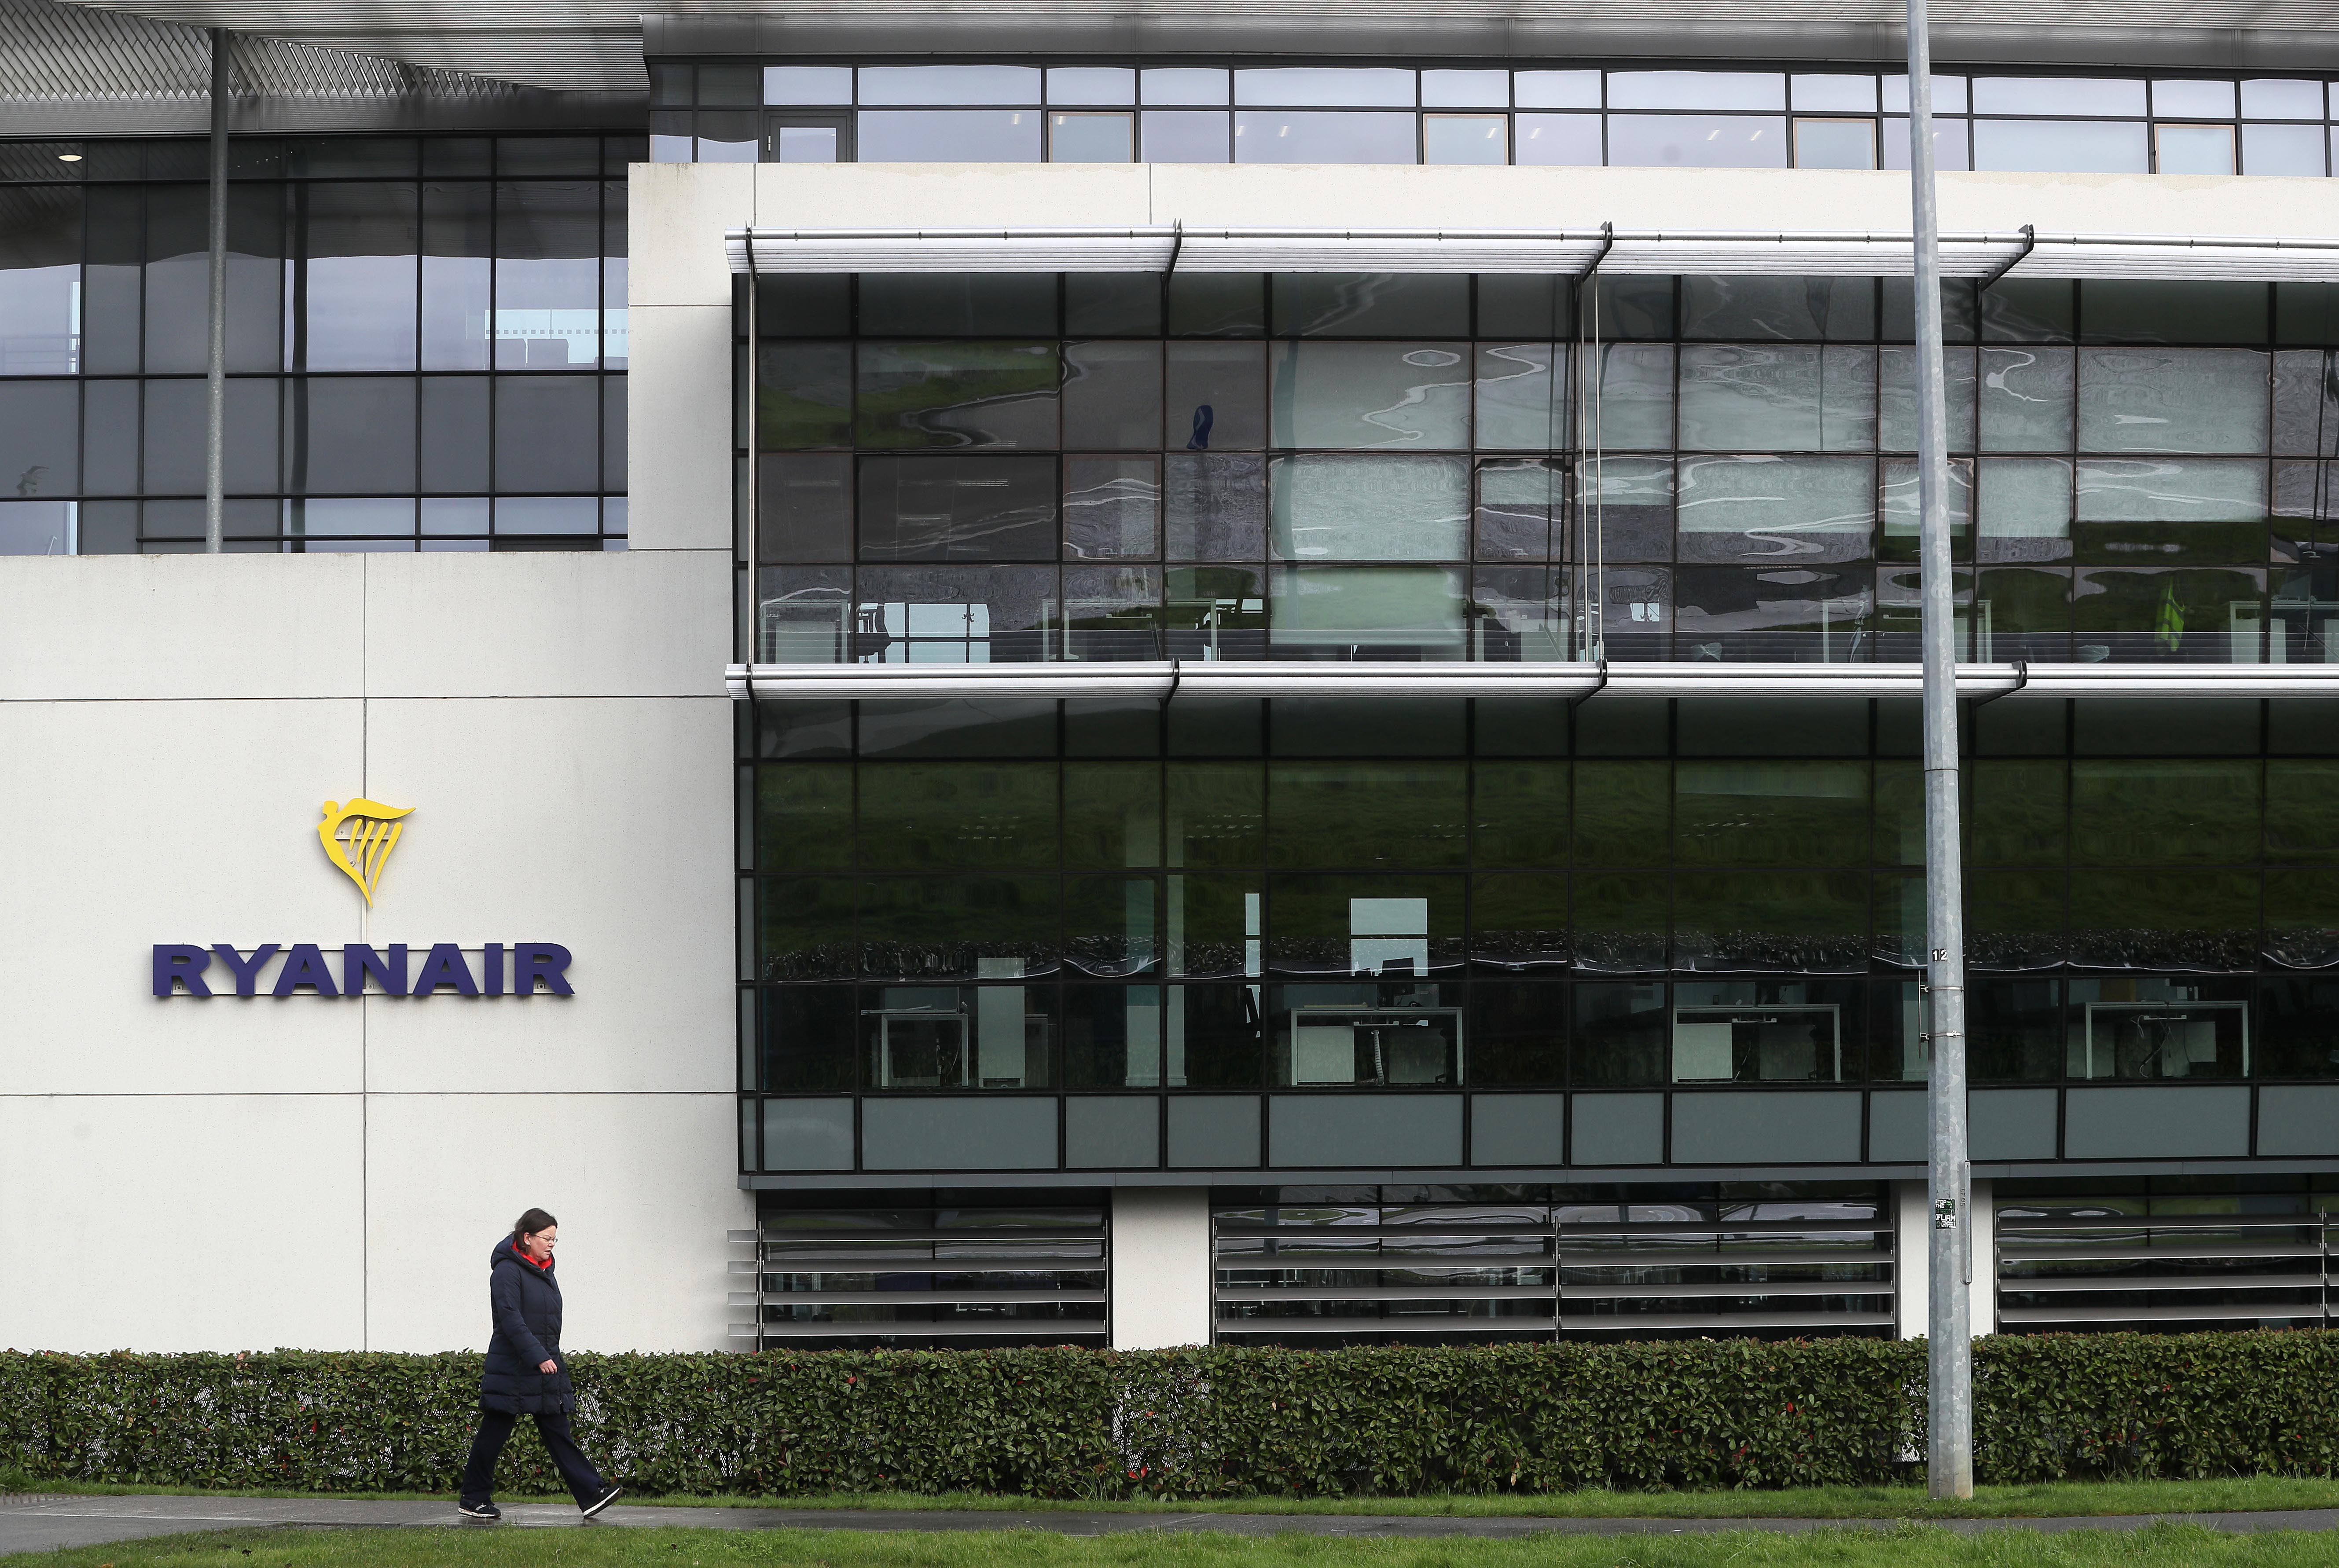 The Ryanair headquarters at Airside Business Park in Swords, Dublin